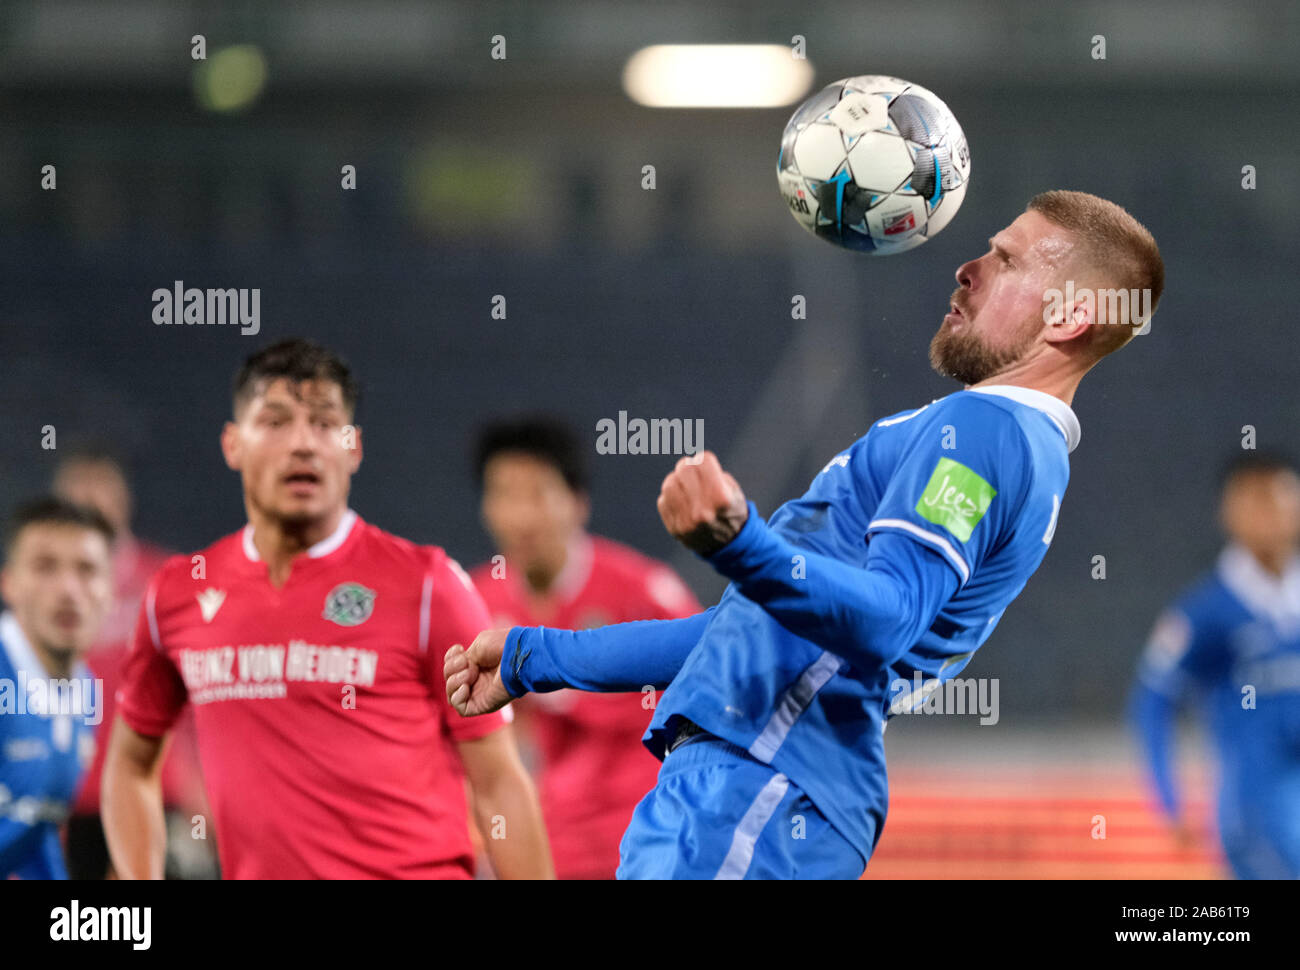 Hanover, Germany. 25th Nov, 2019. Soccer: 2nd Bundesliga, 14th matchday: Hannover 96 - Darmstadt 98 in the HDI-Arena in Hannover. Hanover's Miiko Albornoz (l) and Darmstadt's Tobias Kempe fight for the ball. Credit: Peter Steffen/dpa - IMPORTANT NOTE: In accordance with the requirements of the DFL Deutsche Fußball Liga or the DFB Deutscher Fußball-Bund, it is prohibited to use or have used photographs taken in the stadium and/or the match in the form of sequence images and/or video-like photo sequences./dpa/Alamy Live News Stock Photo